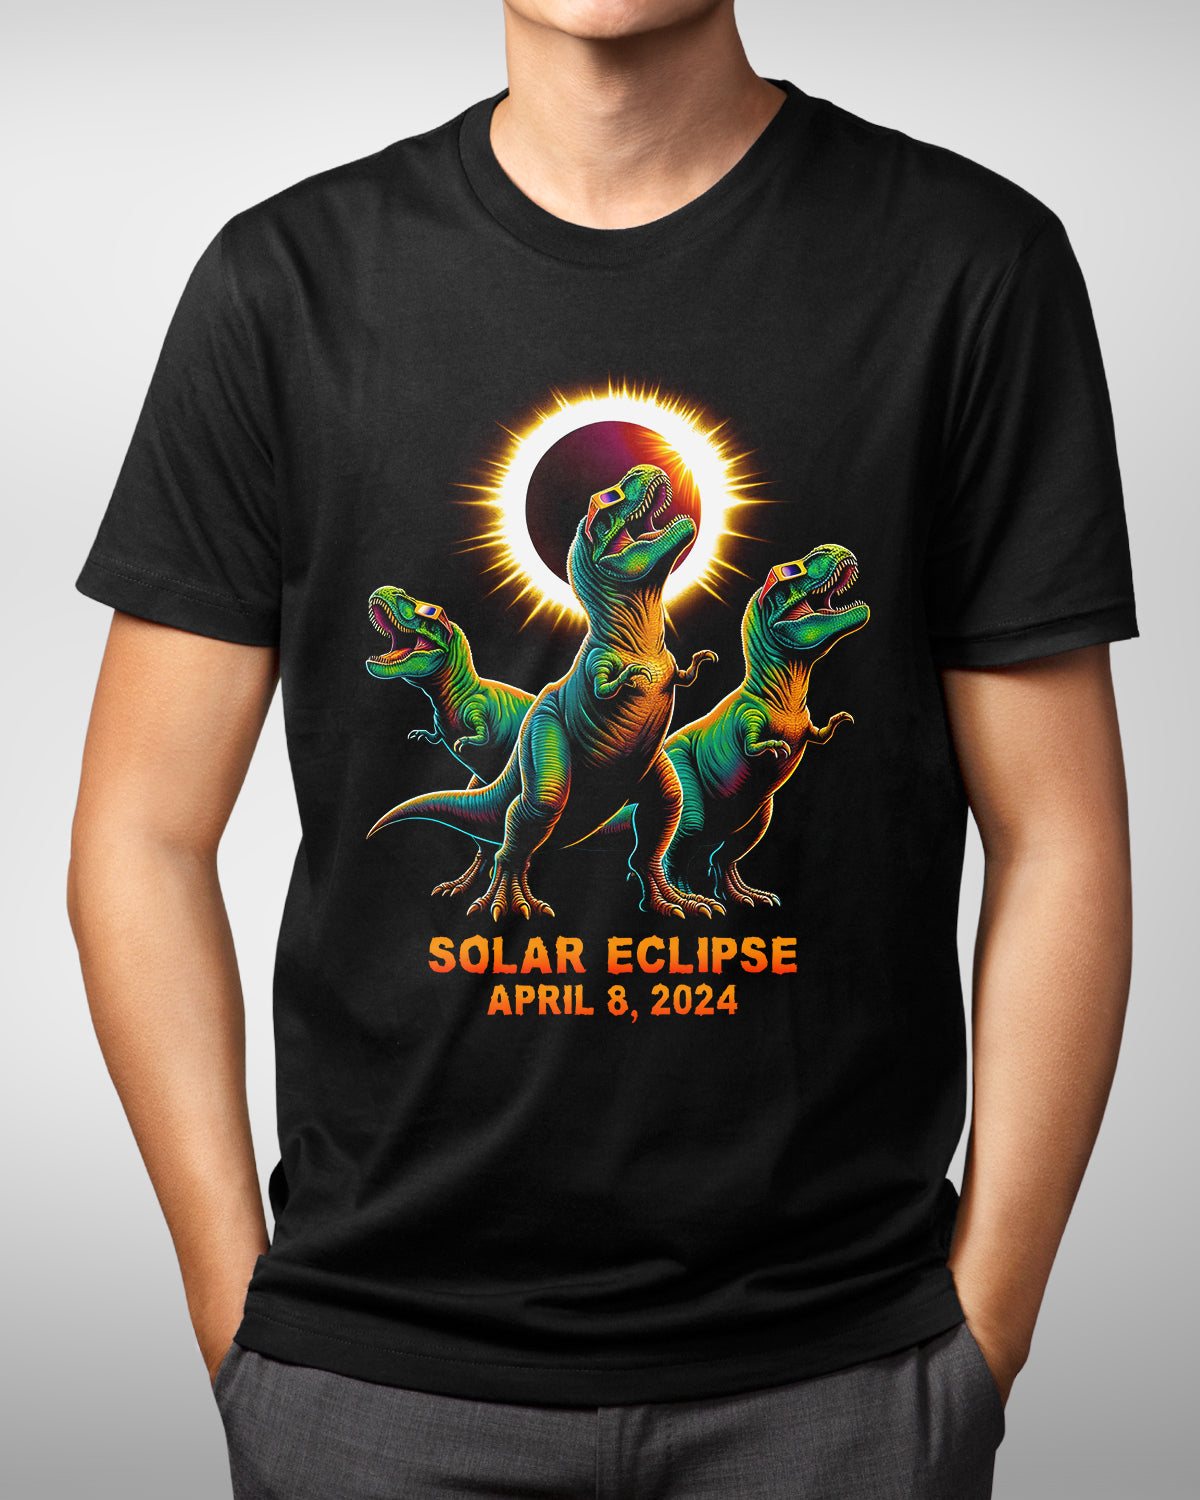 3 Dinosaurs Roaring at Moon Shirt, Funny T Rex Solar Eclipse Tee, April 8 2024 Totality Souvenir, Dino Lover Gift